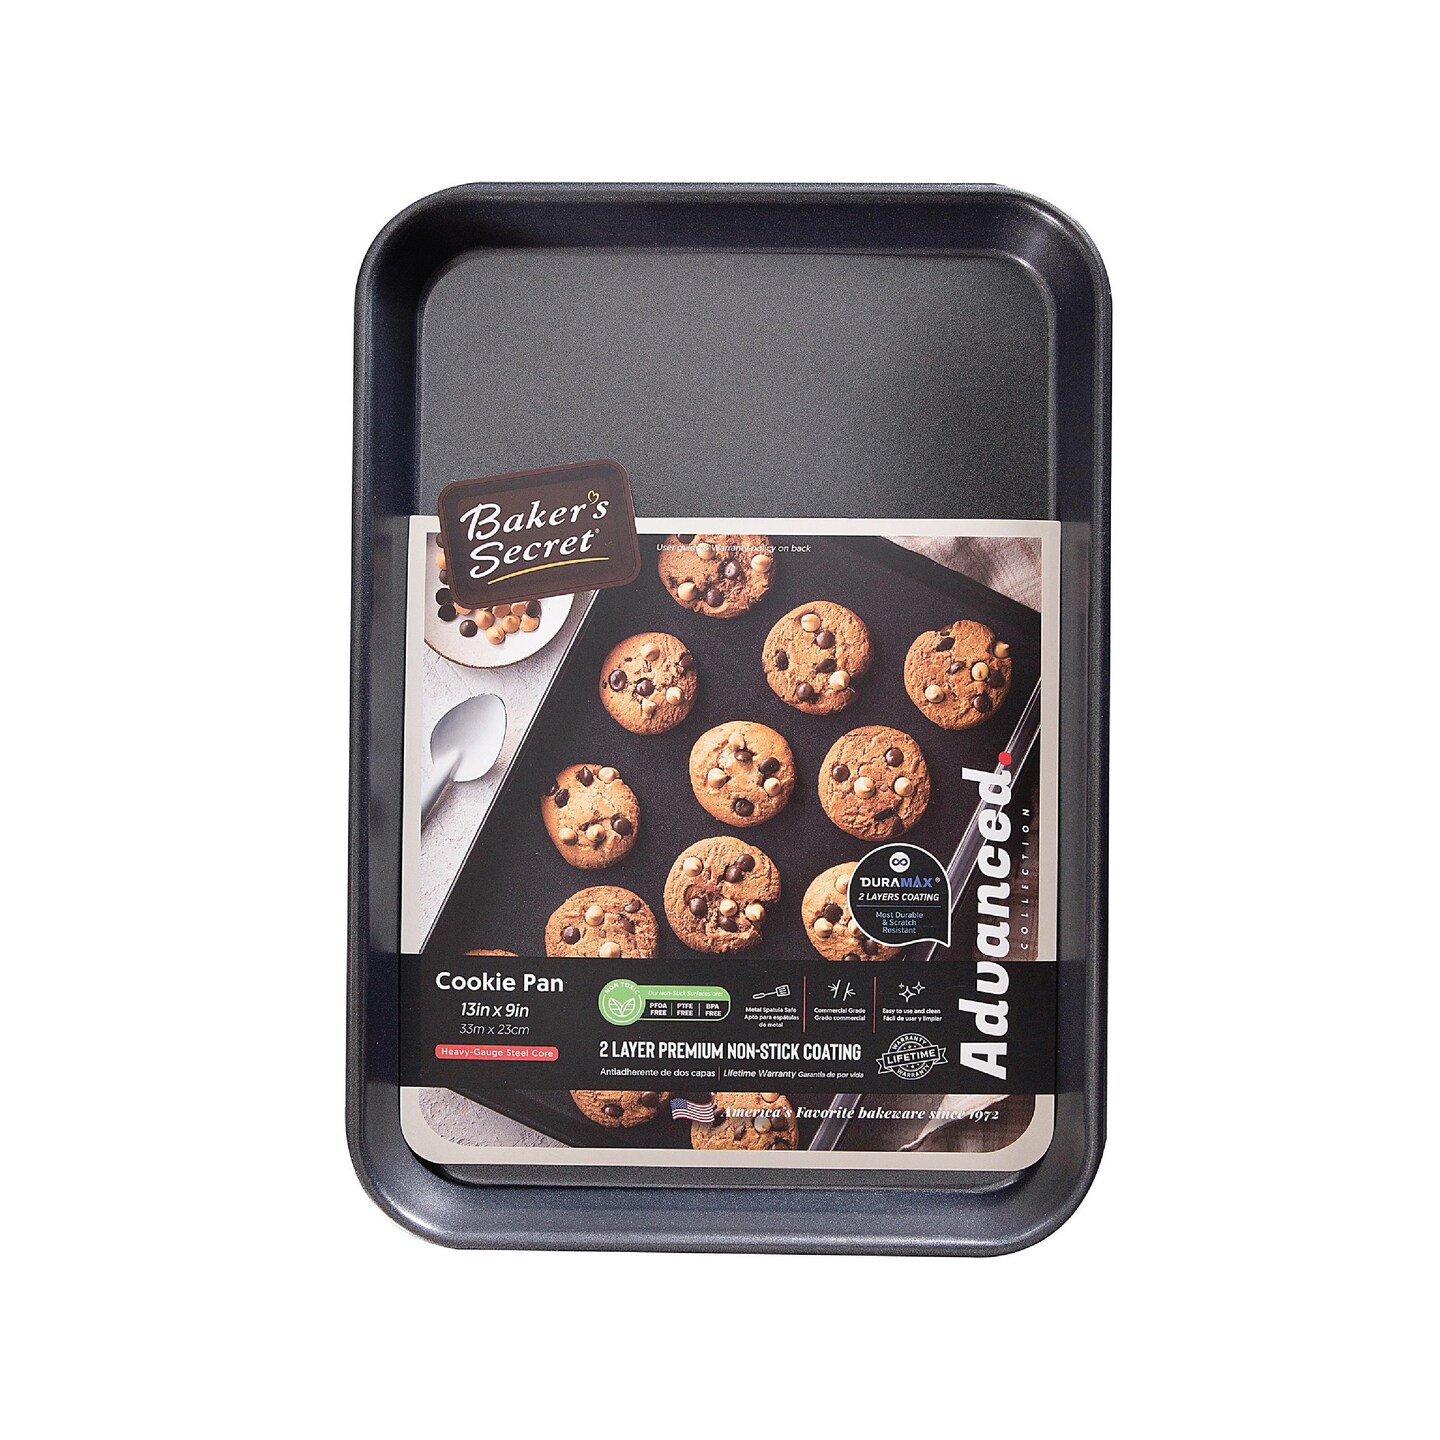  Baker's Secret Nonstick Cookie Sheet 13, Carbon Steel Small  Size Cookie Tray with Premium Food-Grade Coating, Non-stick Cookie Sheet,  Bakeware DIY Baking Accessories - Classic Collection: Home & Kitchen